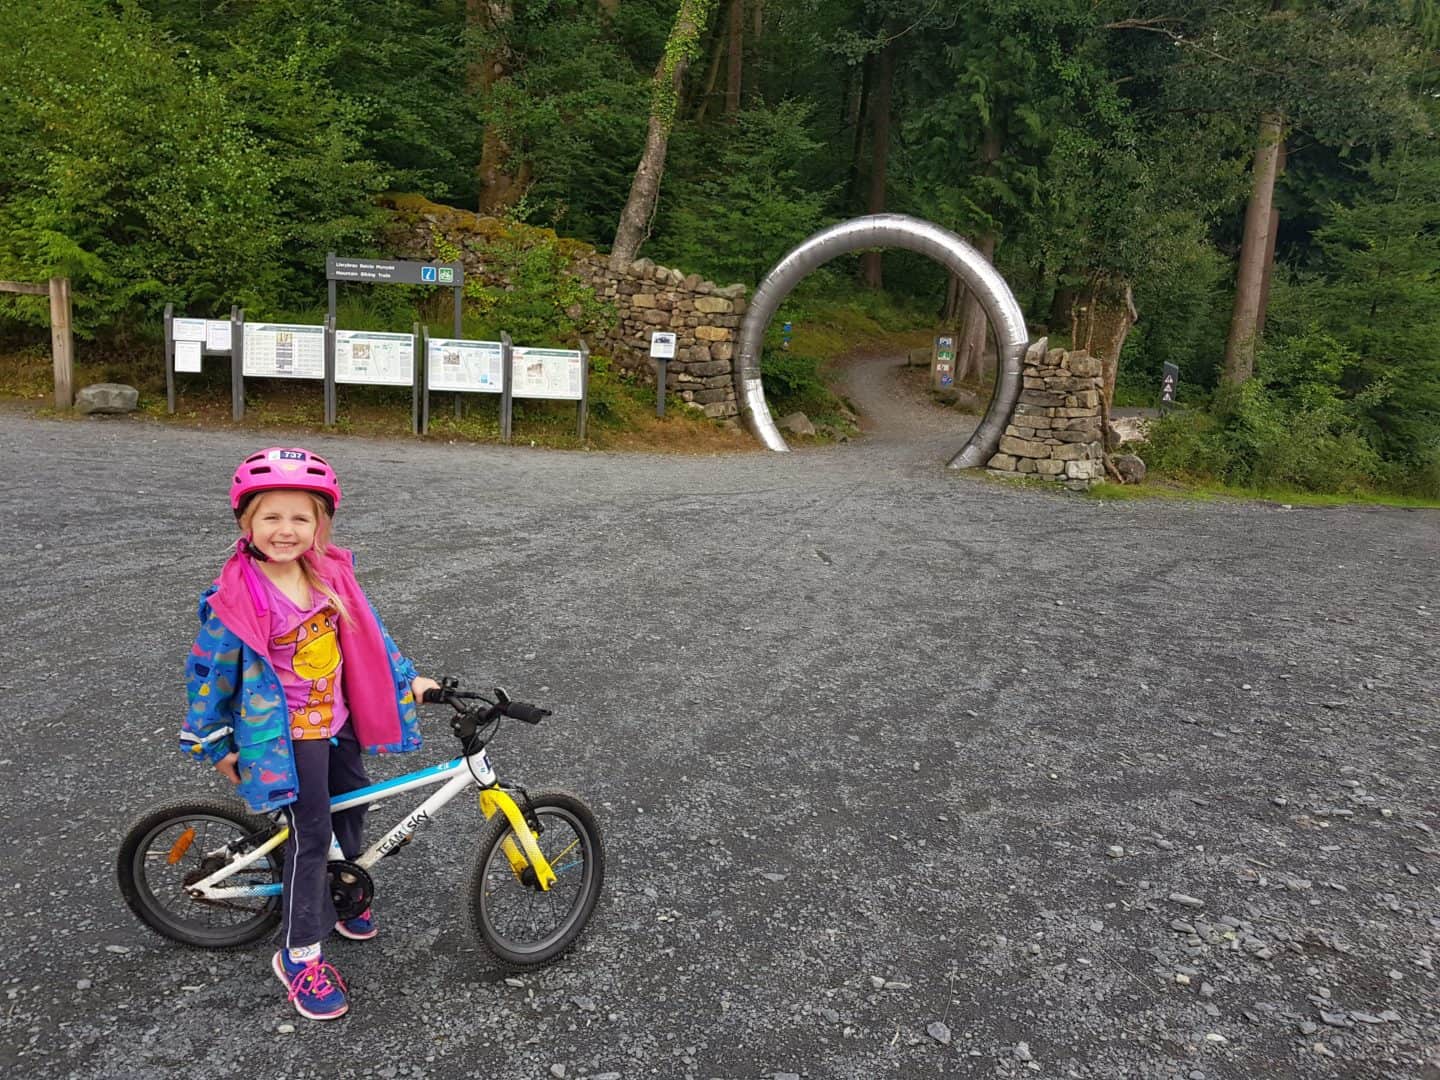 Child about to start cycling the family trail at Coed y Brenin Forest Park